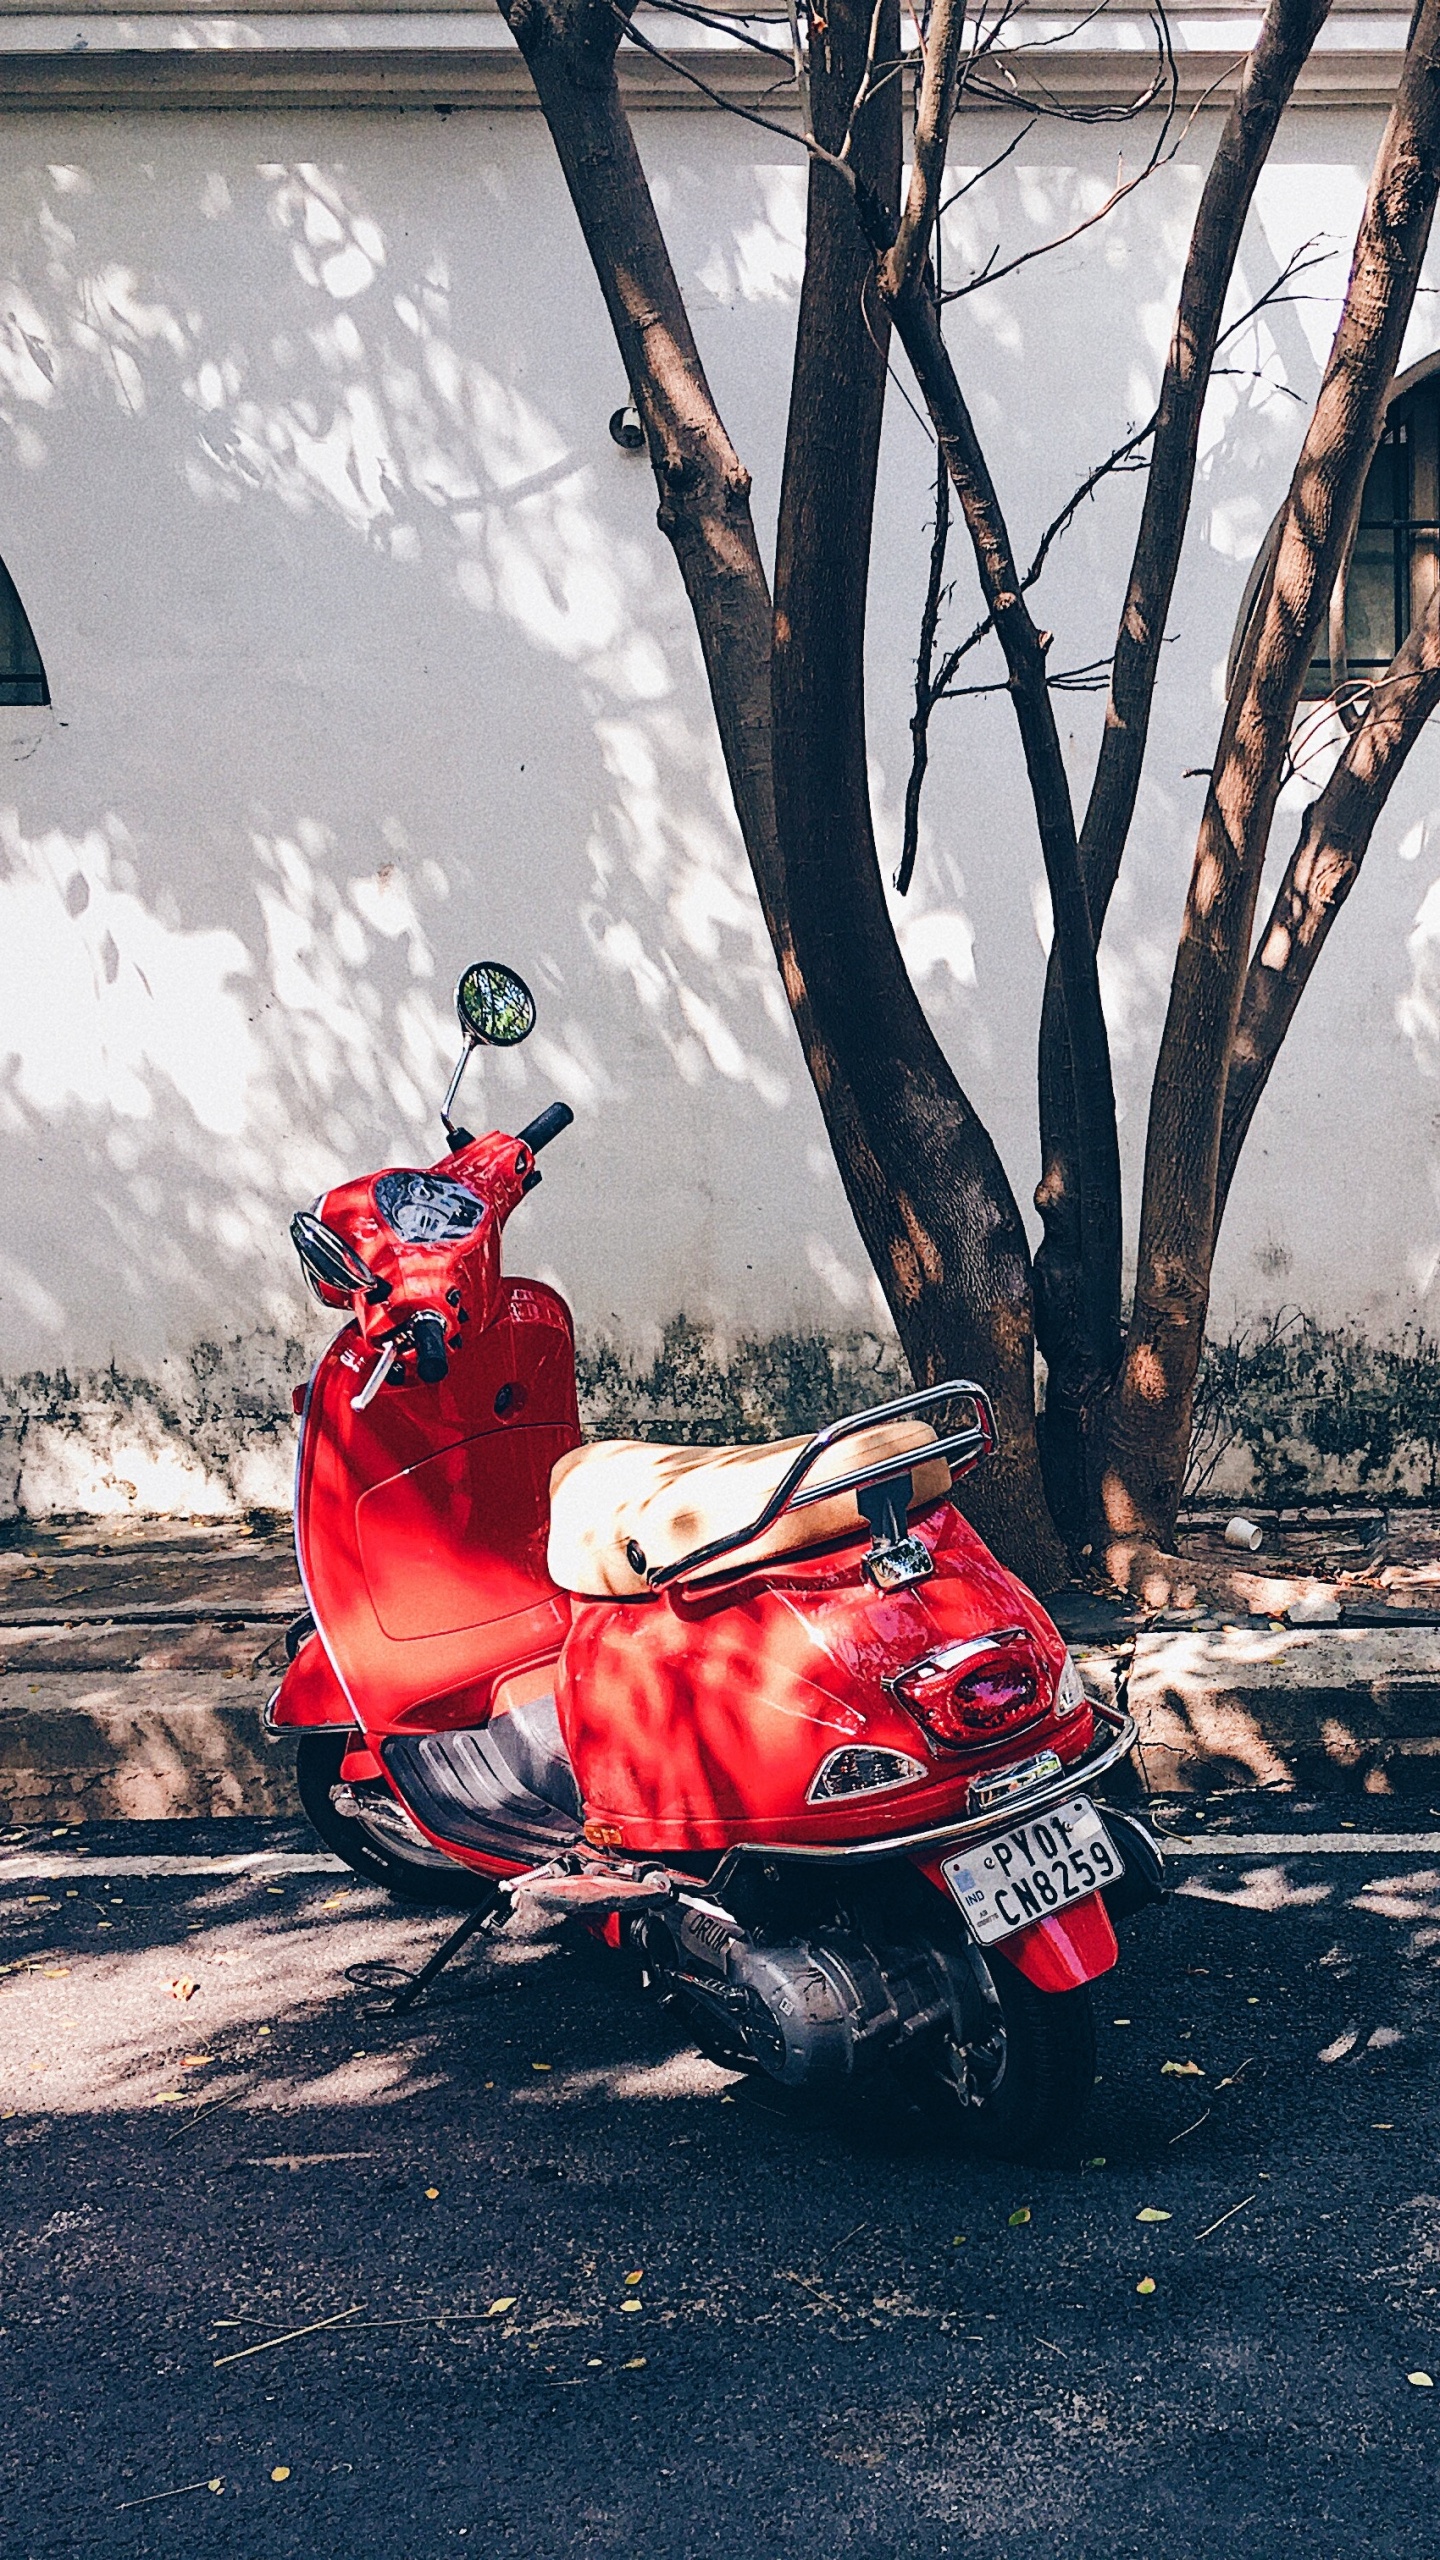 Man in Red Jacket Riding Red Motor Scooter on Road During Daytime. Wallpaper in 1440x2560 Resolution